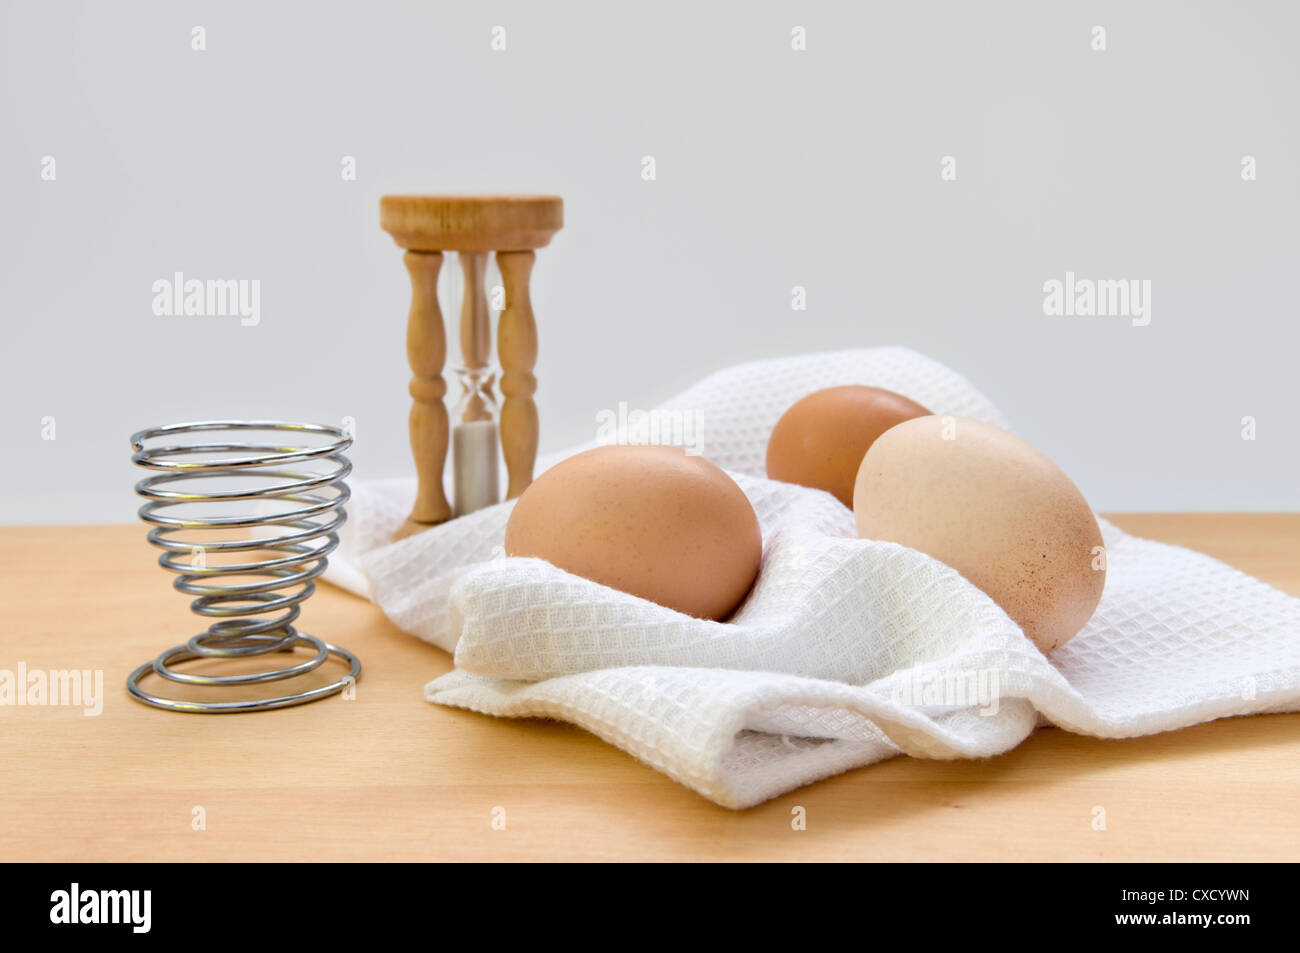 Still life image of egg timer, egg sand egg cup on napkin on top of wooden chopping board against a white background Stock Photo